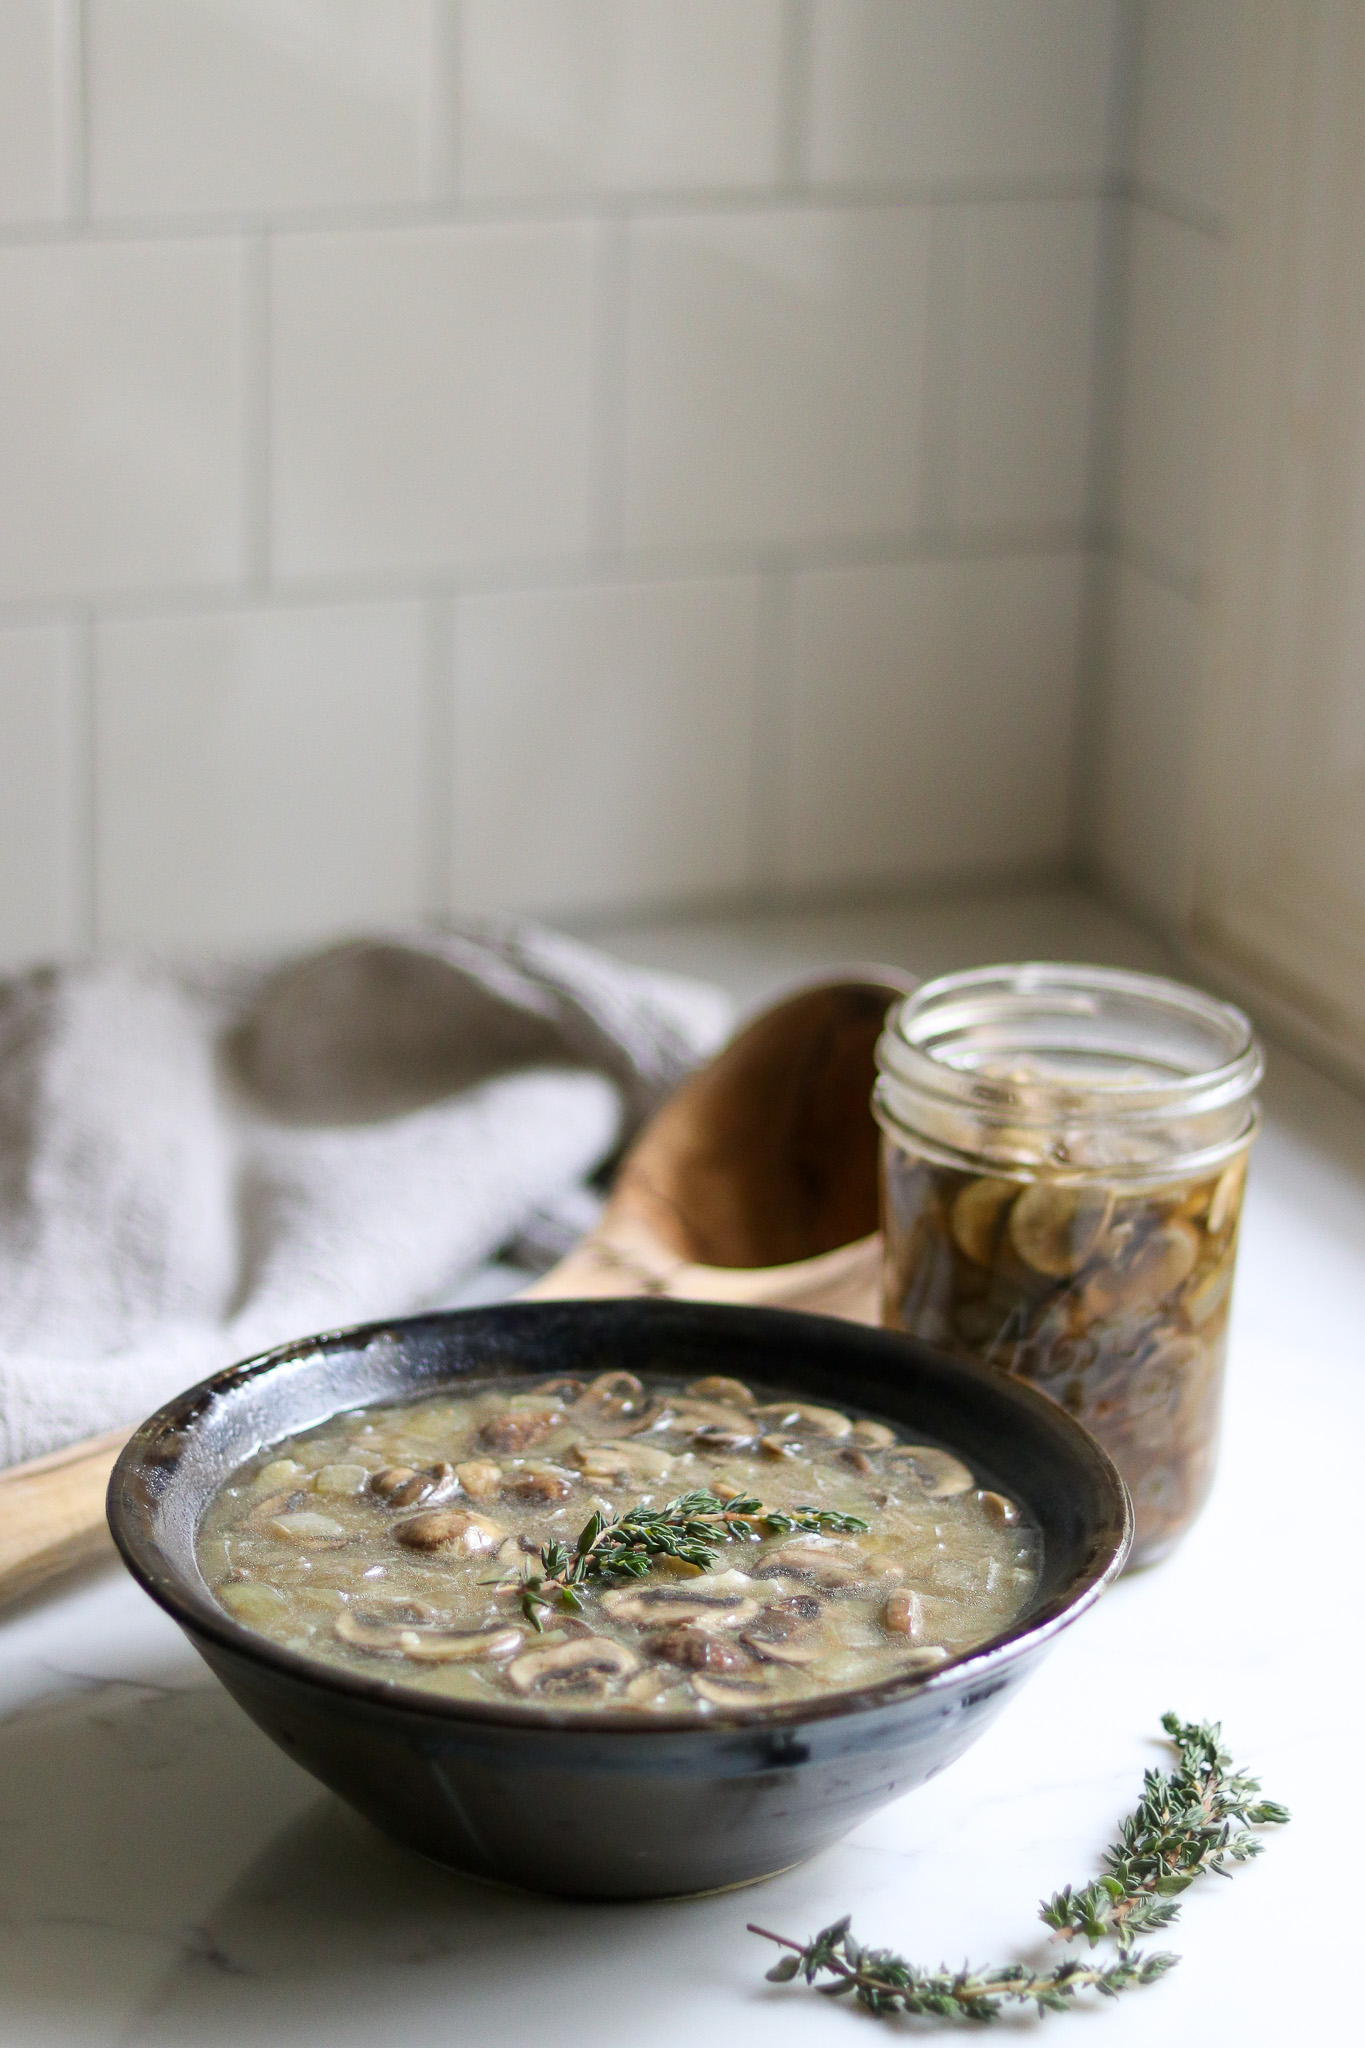 Prepared Cream of Mushroom Soup from Canning